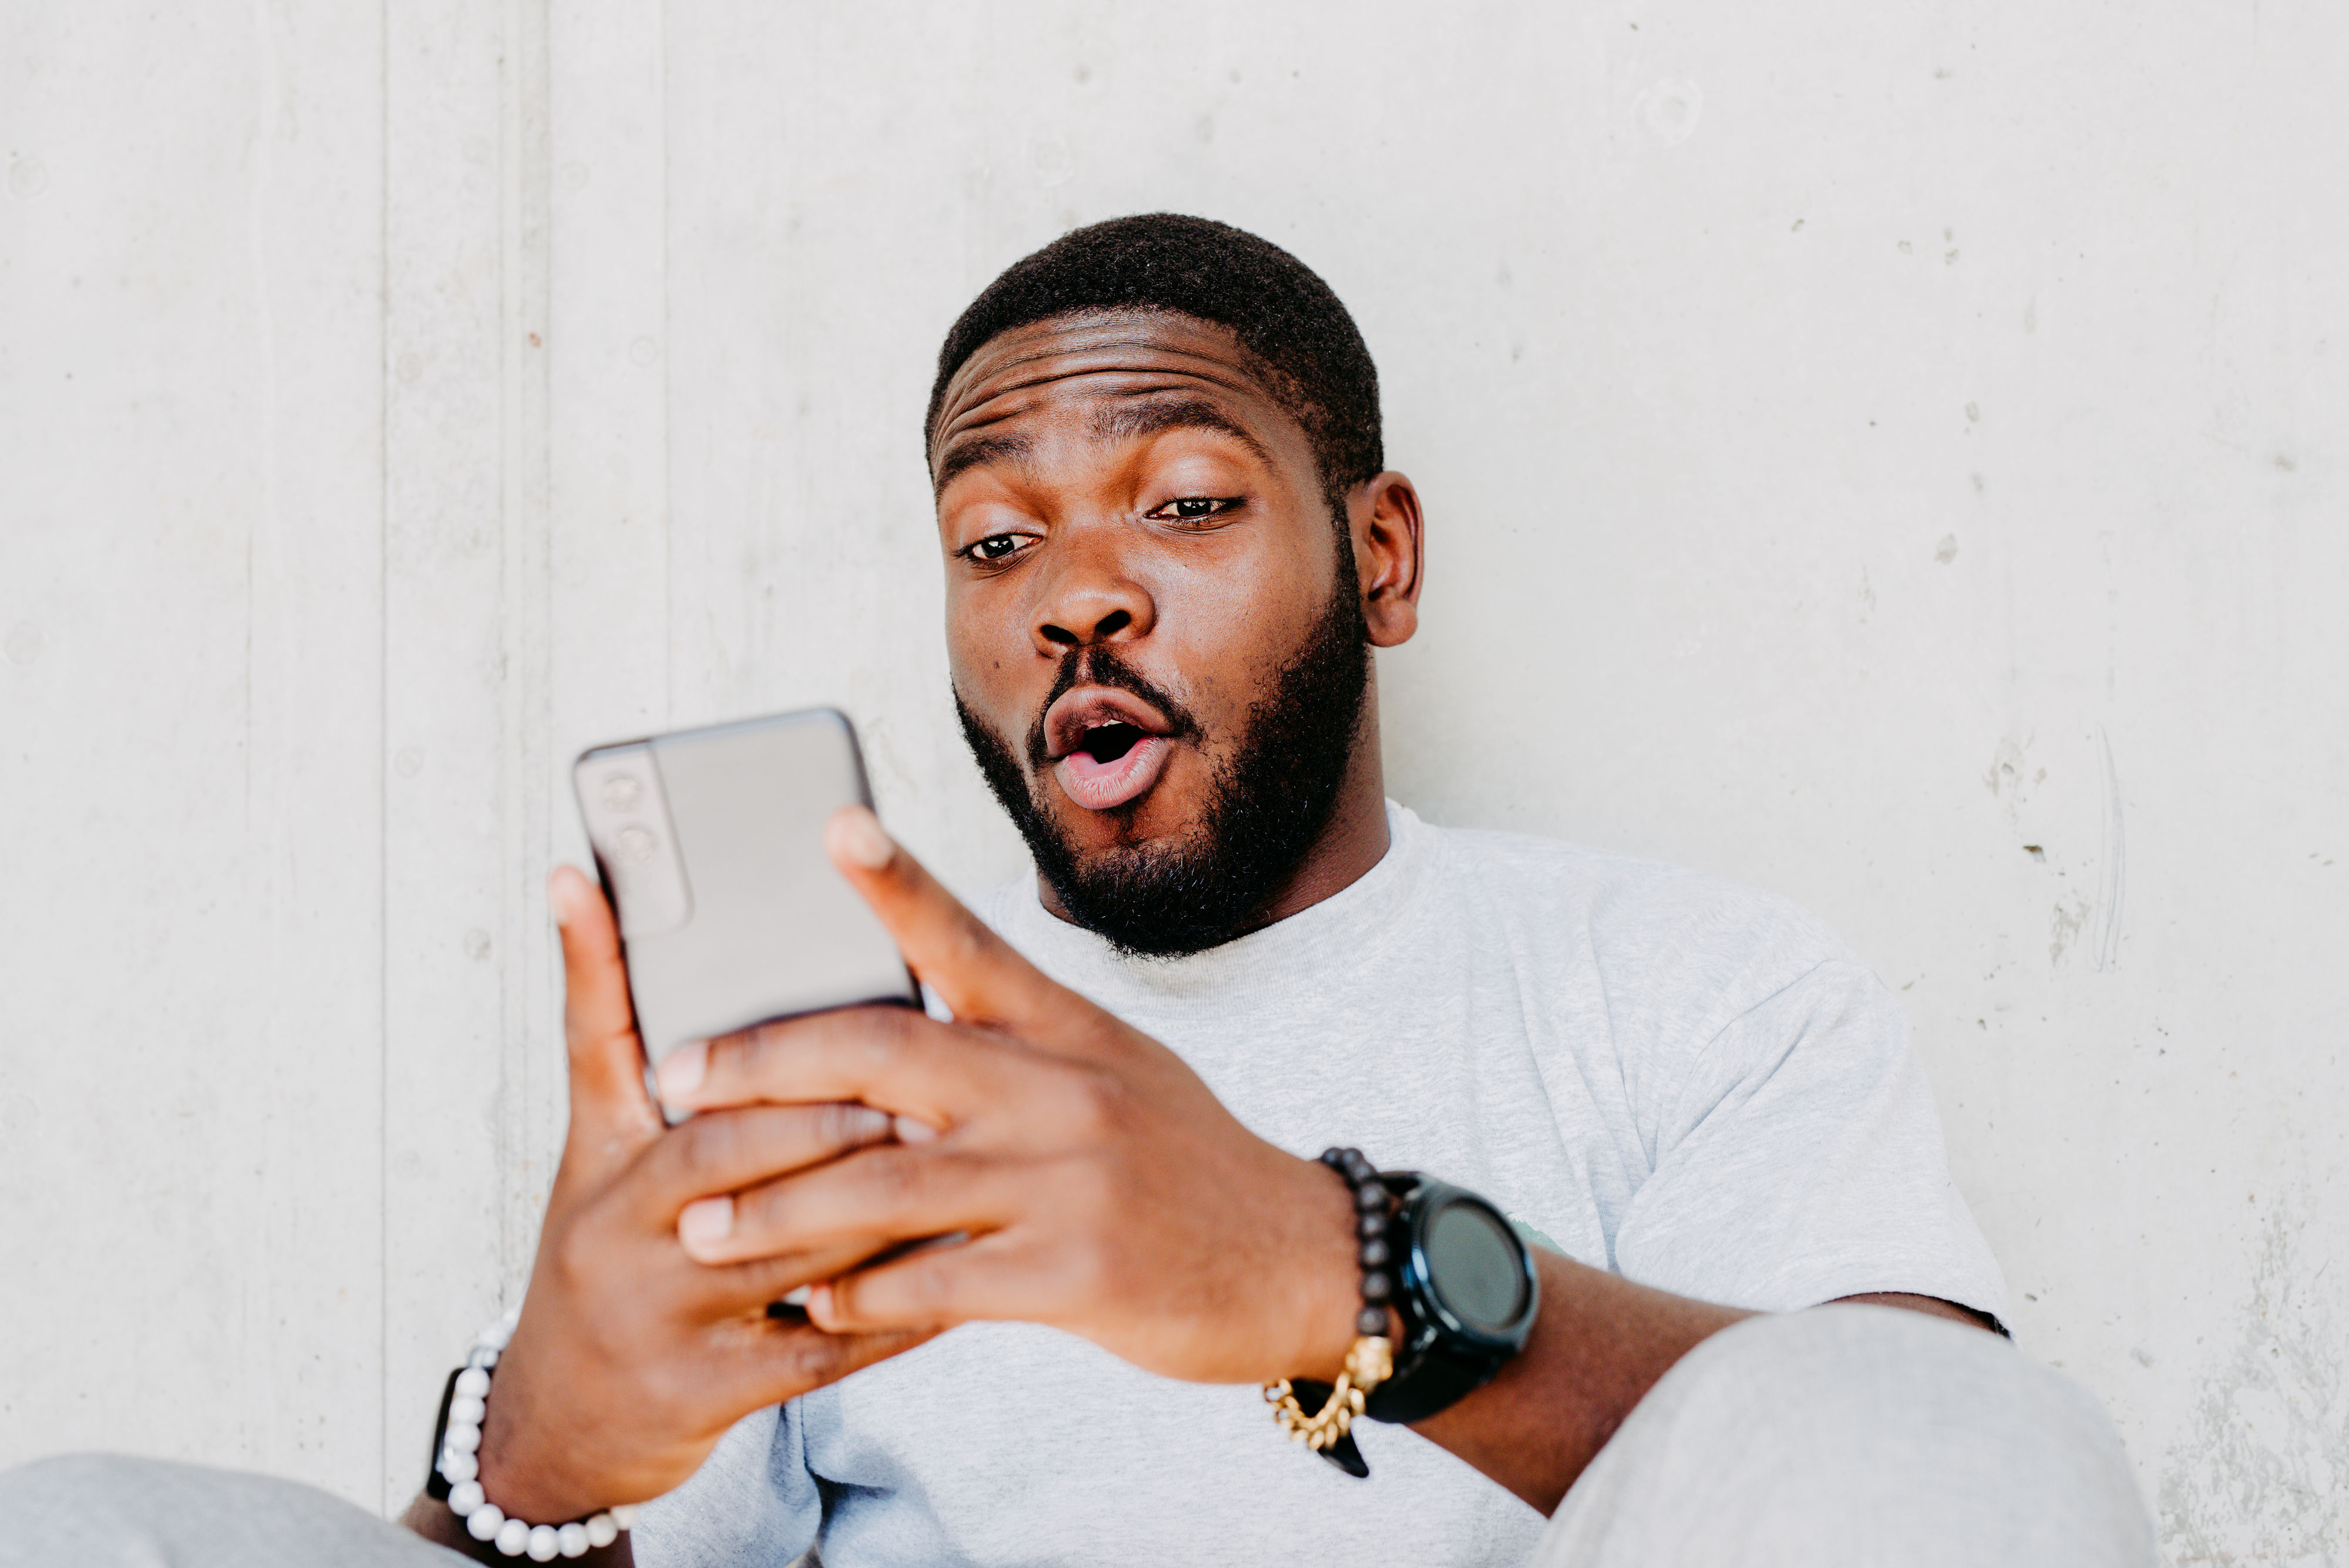 Man with surprised expression looking at smartphone, reflecting work-related news